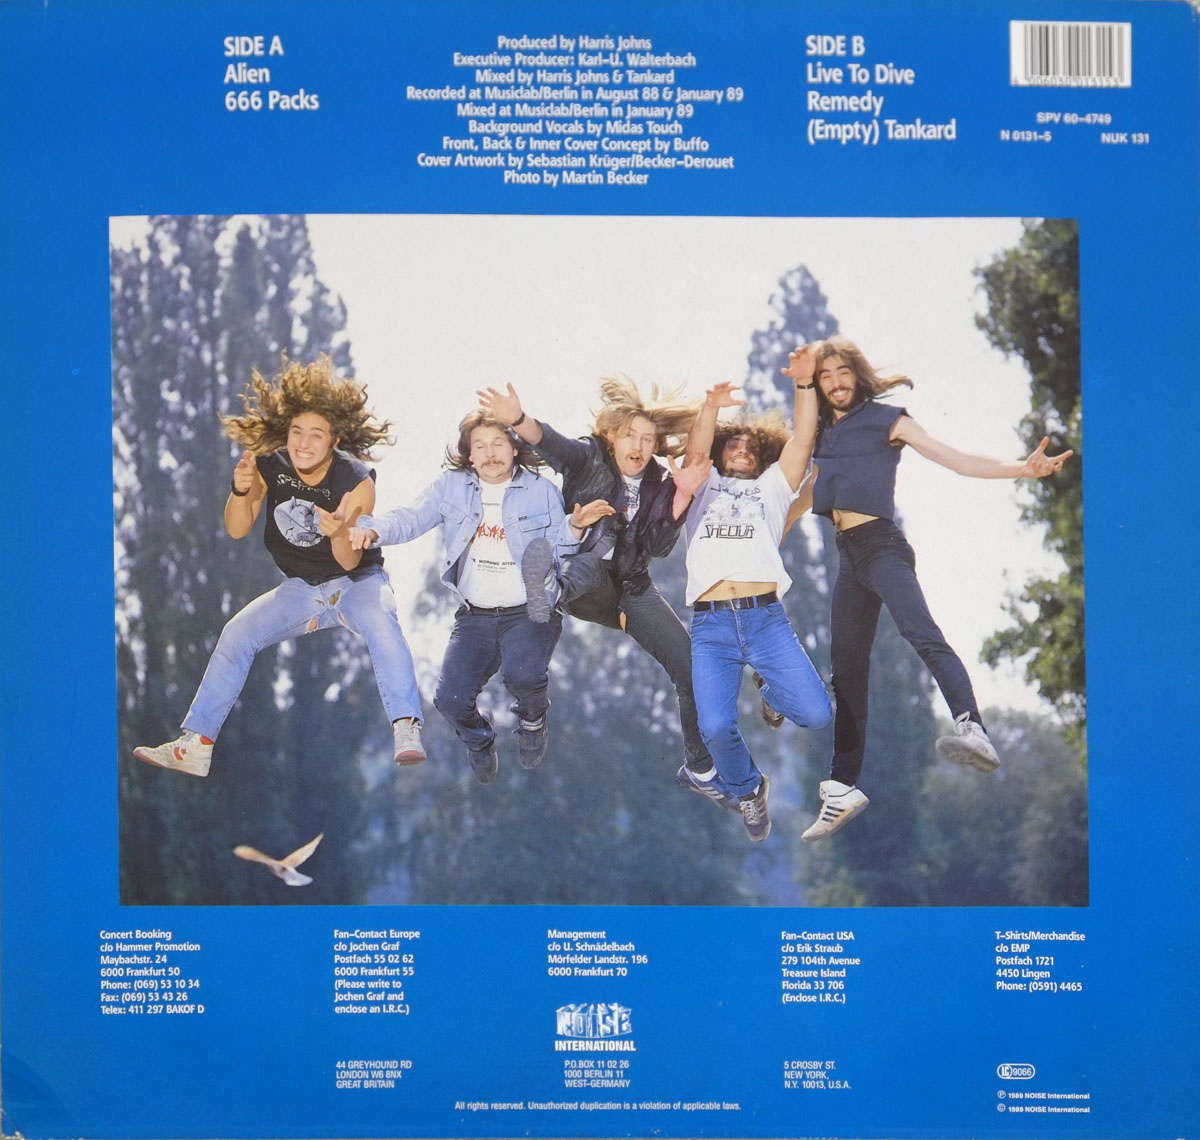 A photo of the Tankard band-members jumping in the air on the back cover of the Alien Album  